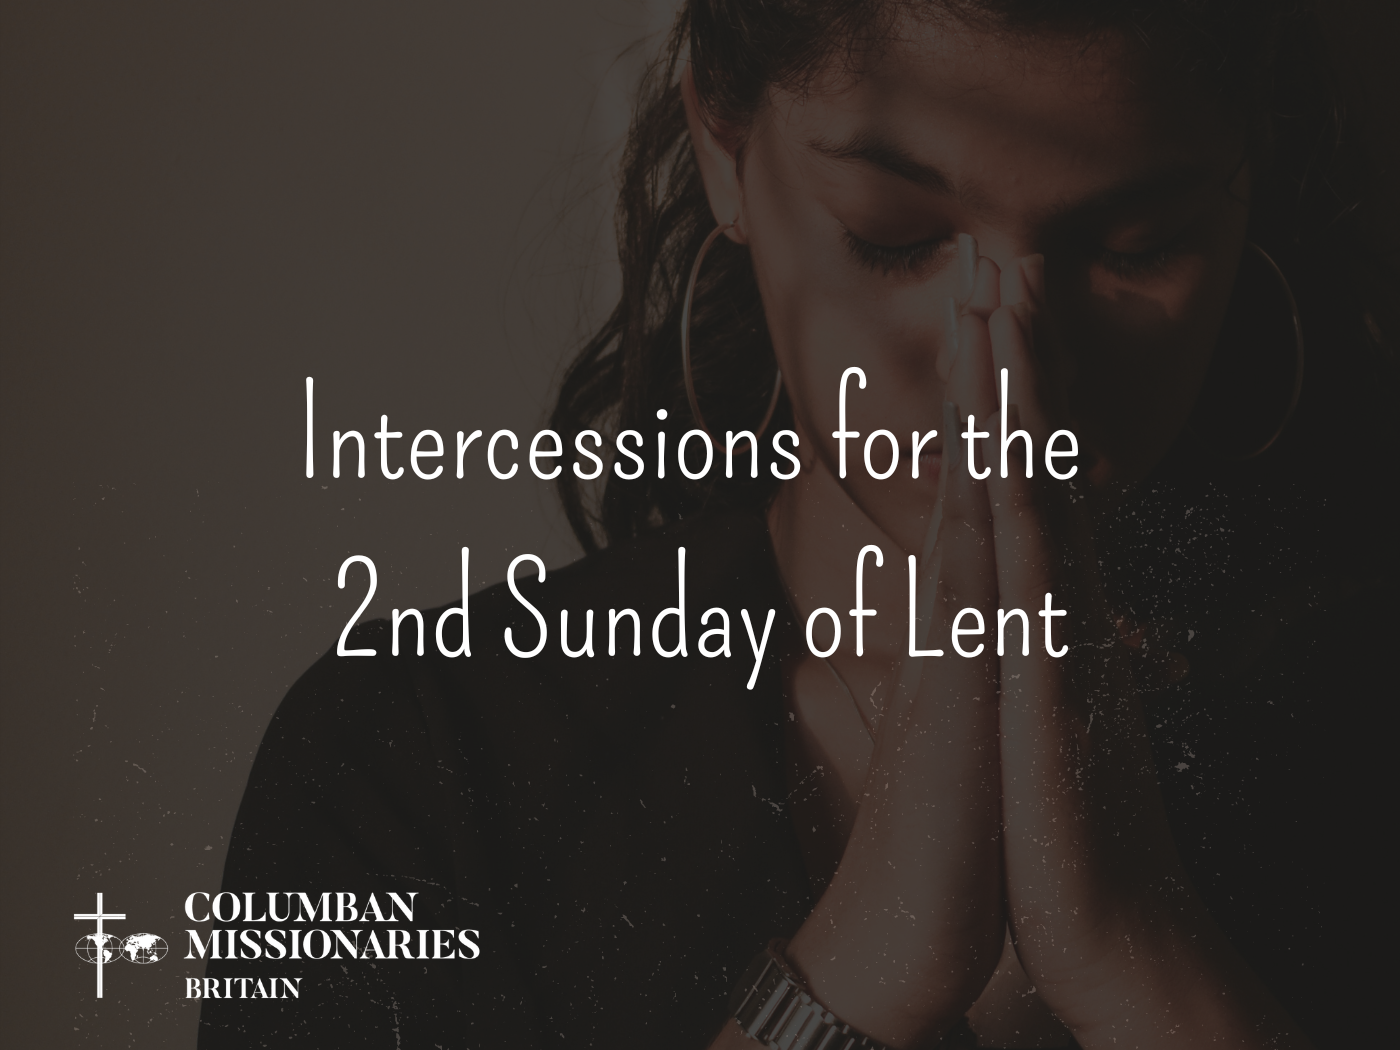 Download prayers of intercession for the 2nd Sunday of Lent Columban